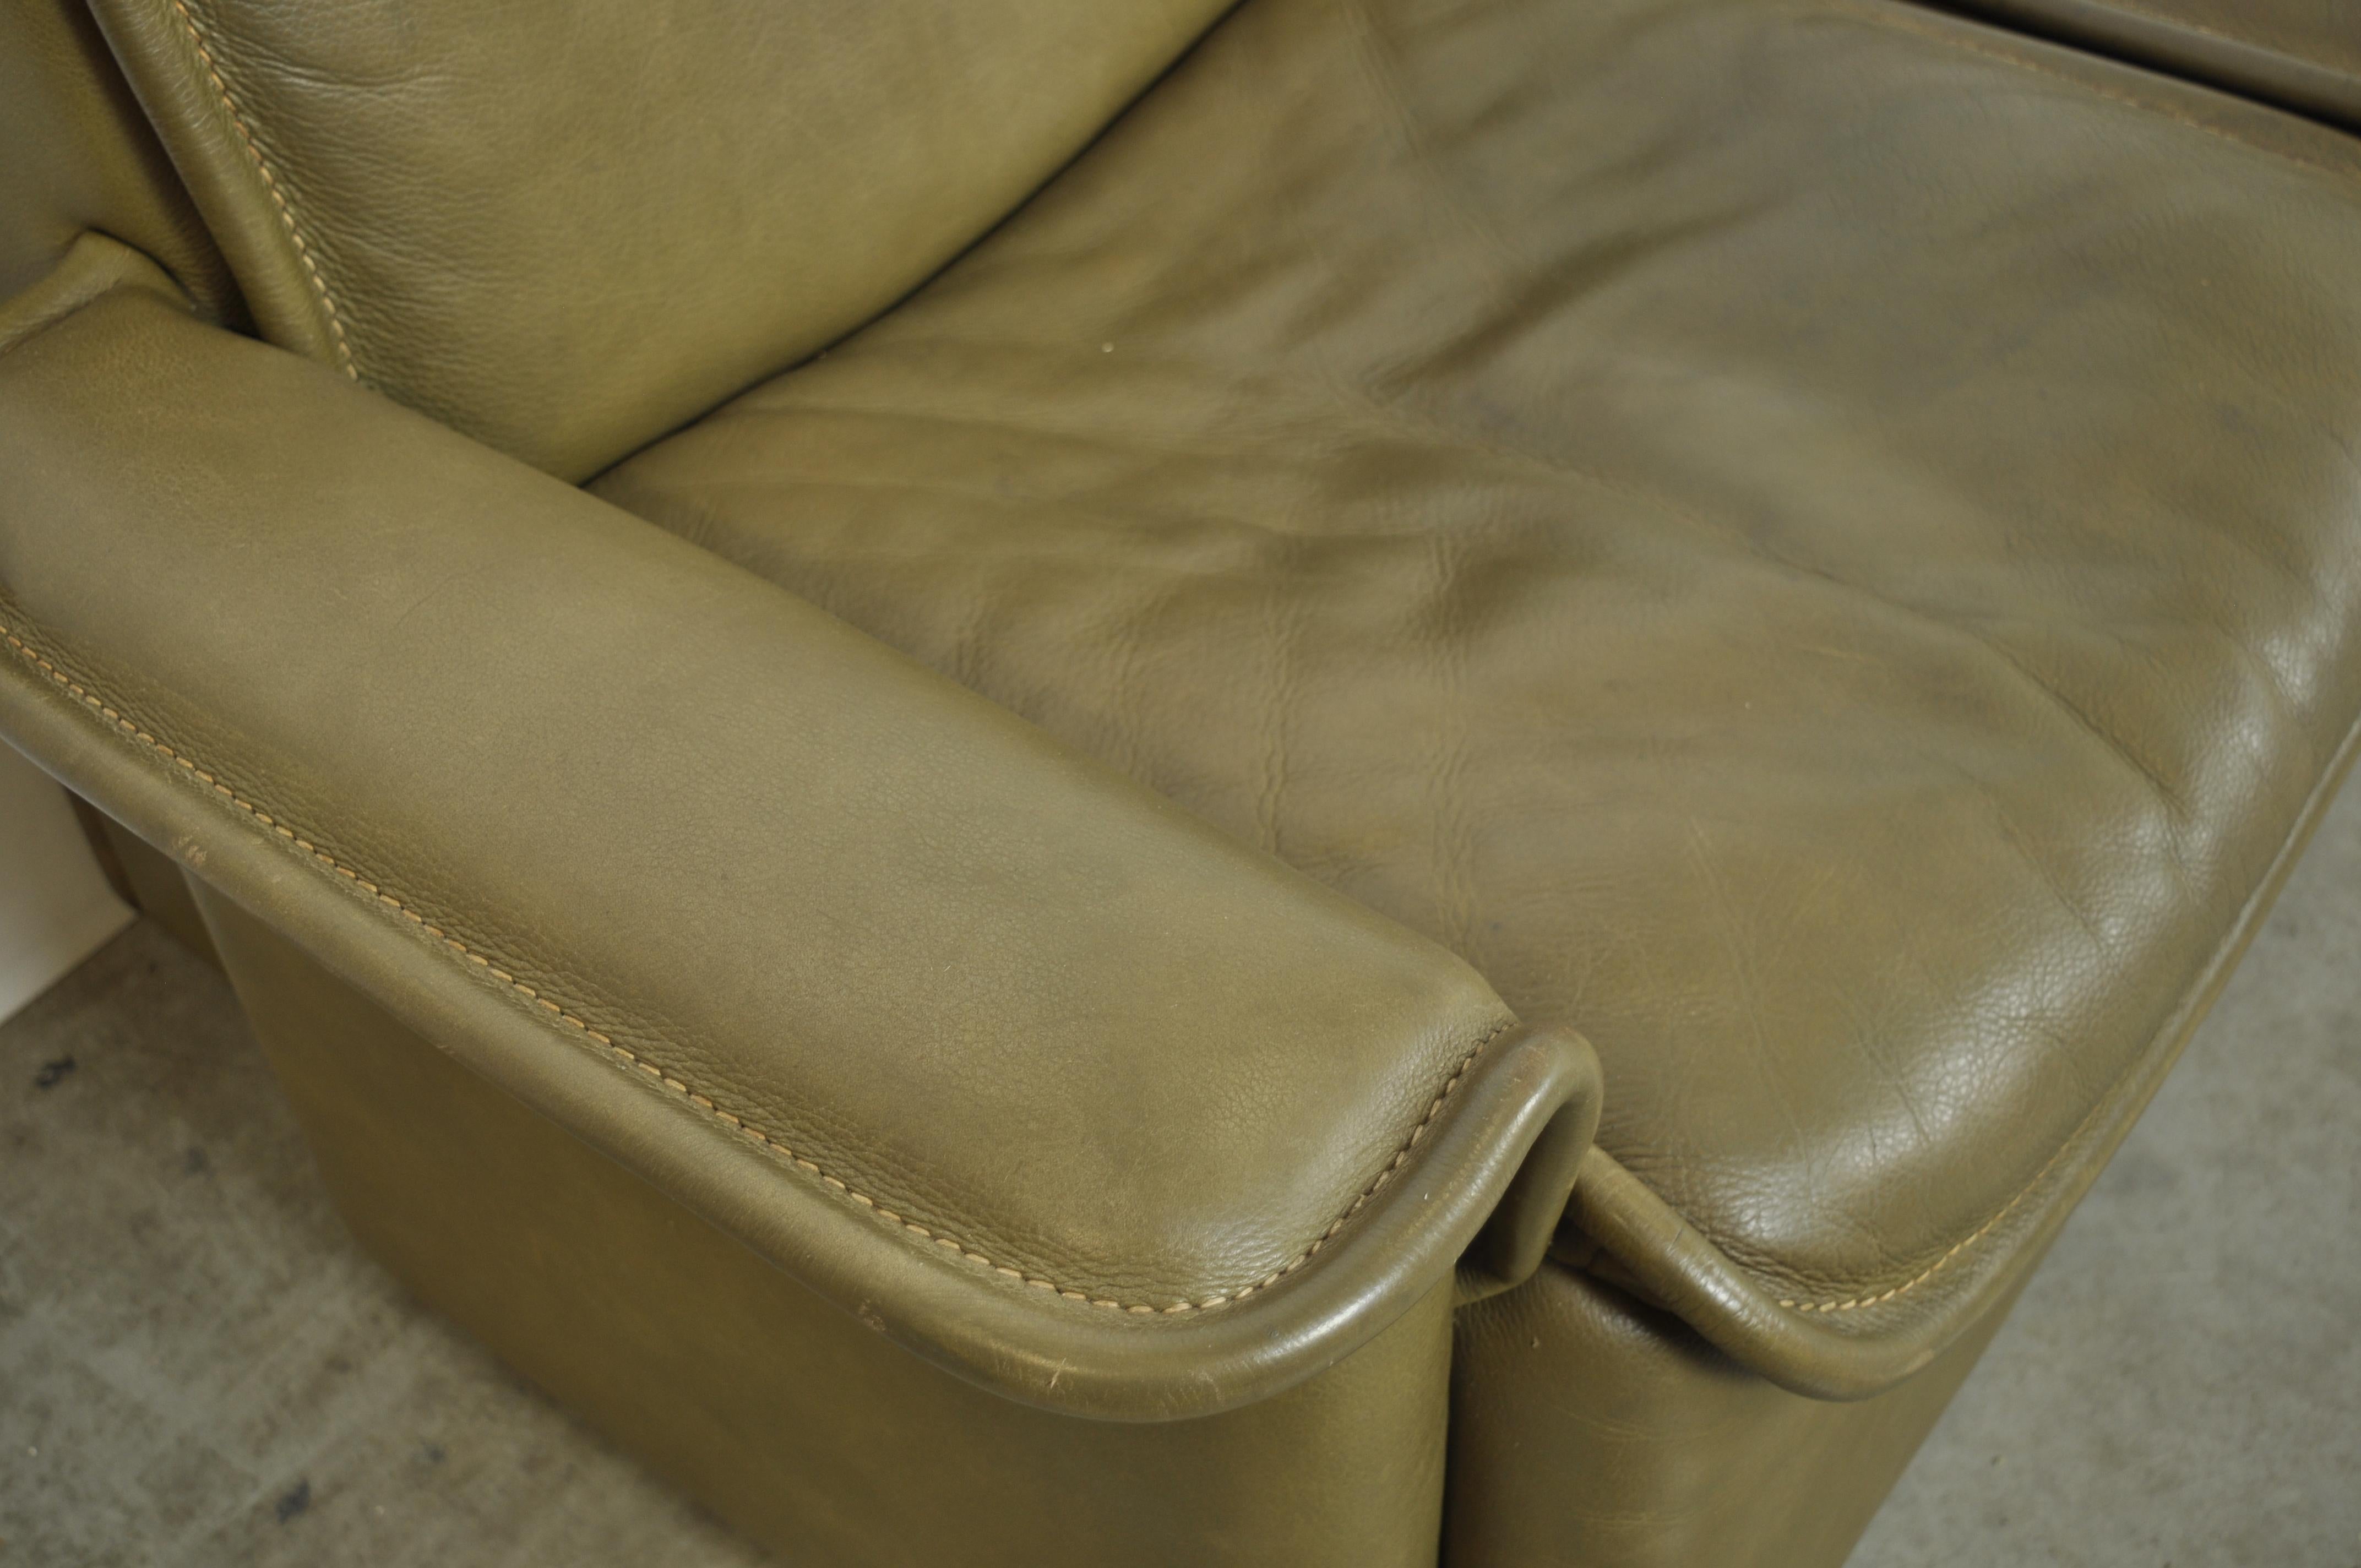 Olive Colored Leather 3-Seater Sofa, Model Ds-12 by De Sede, 1970s Switzerland For Sale 1